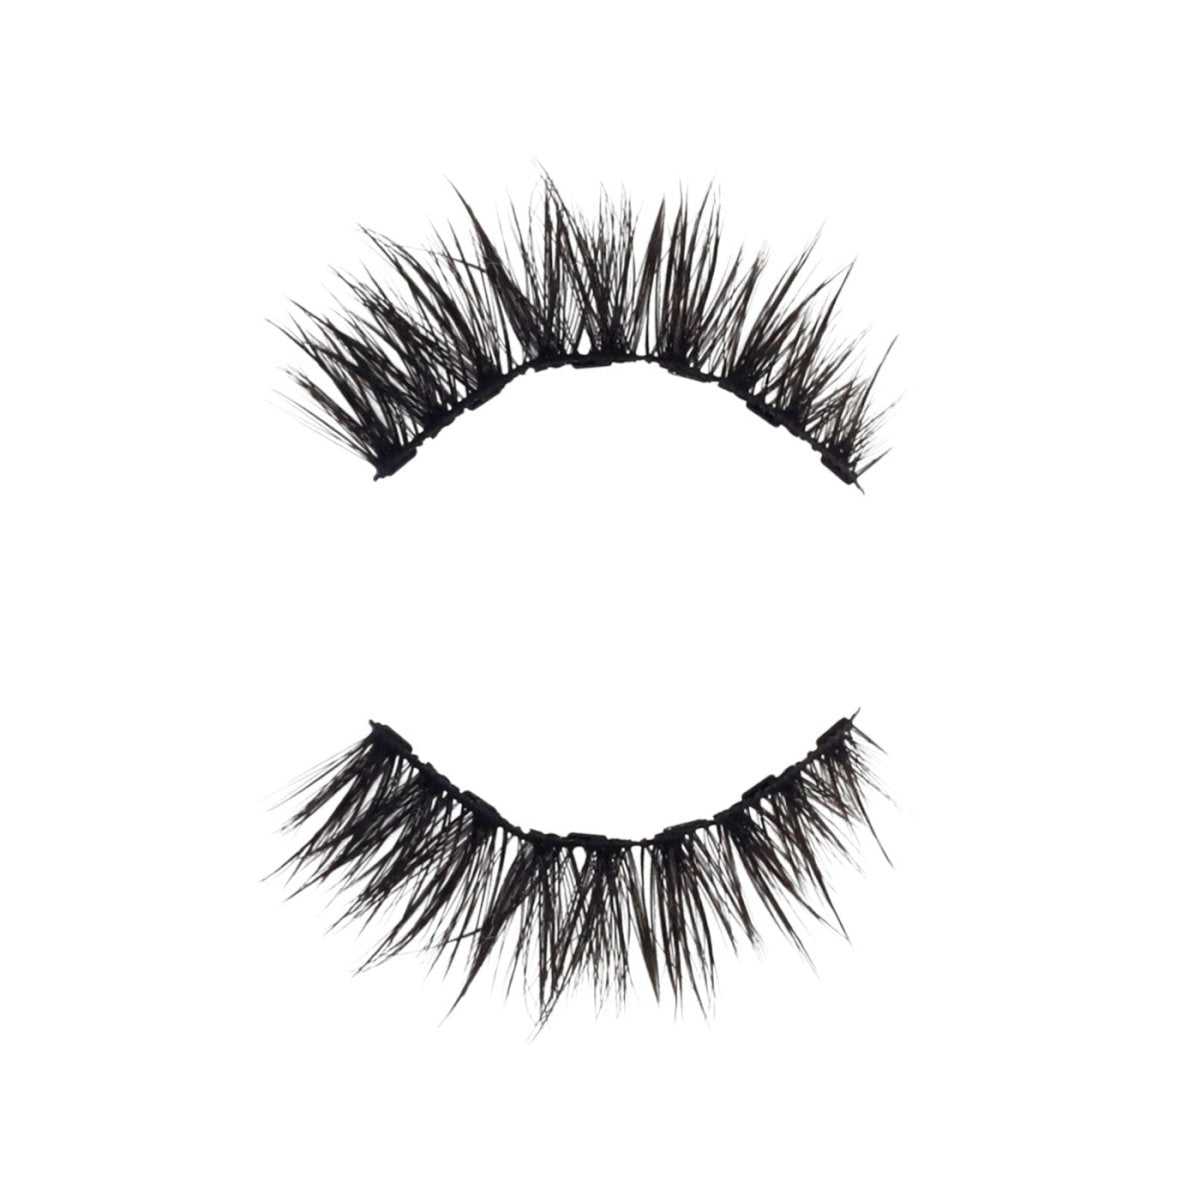 Kiss & Tell Magnetic Lashes - Lola's Lashes